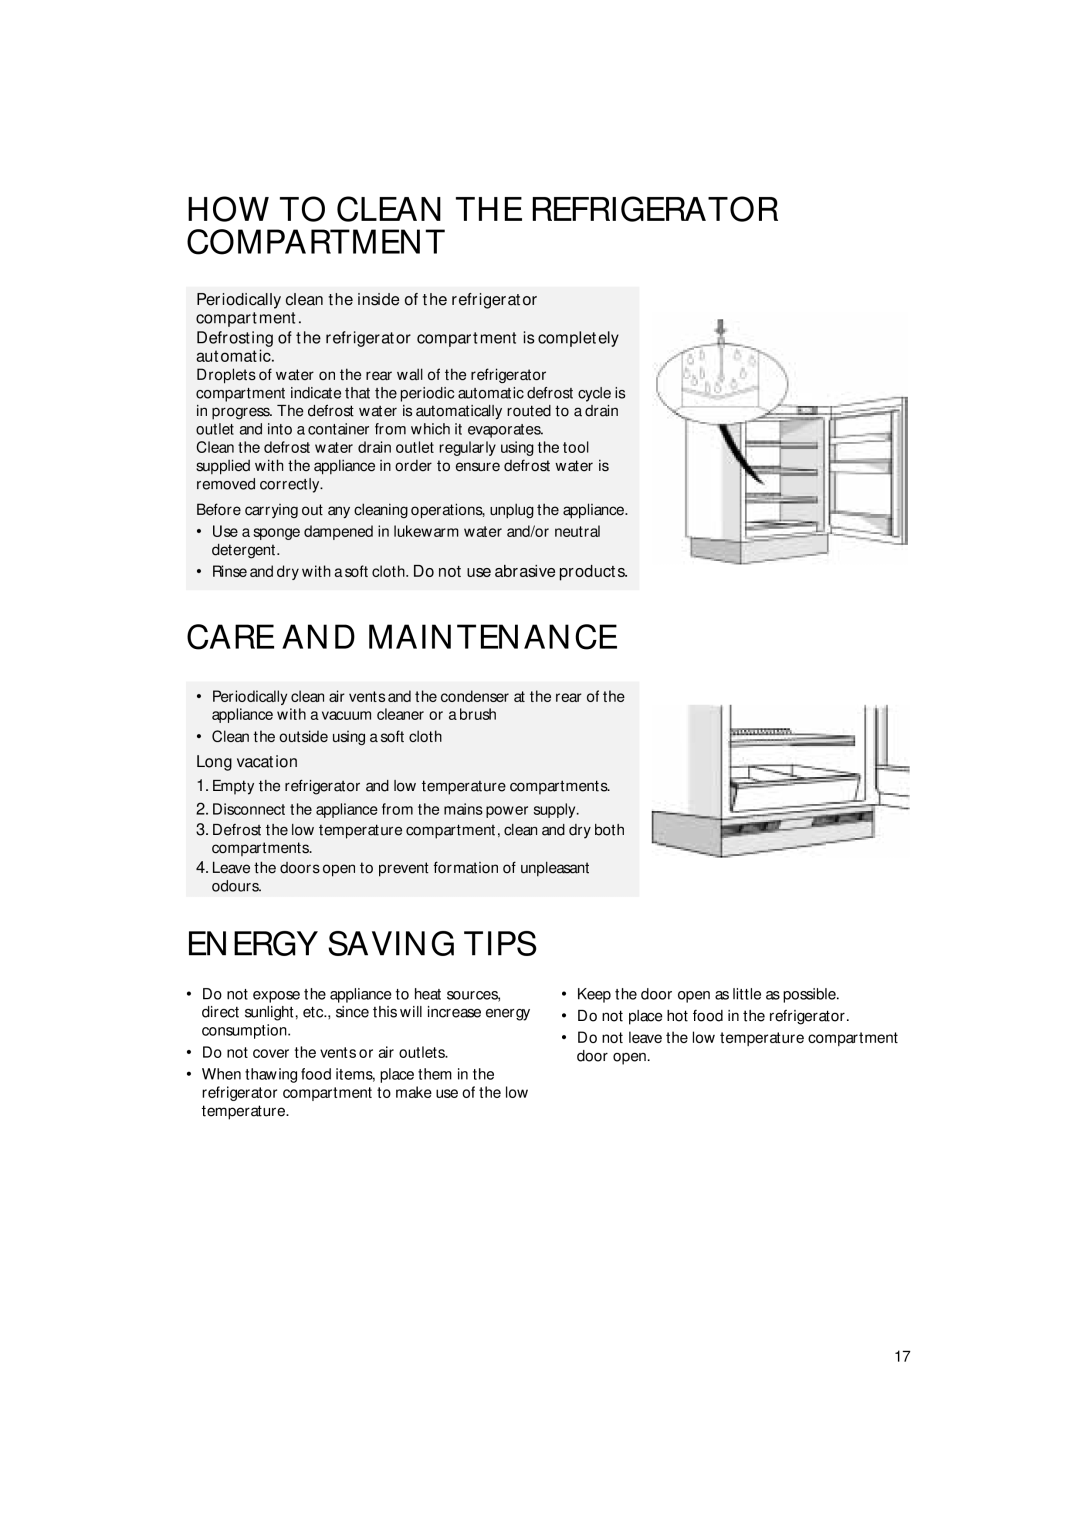 Smeg FR148A1 manual How To Clean The Refrigerator Compartment, Care And Maintenance, Energy Saving Tips, Long vacation 